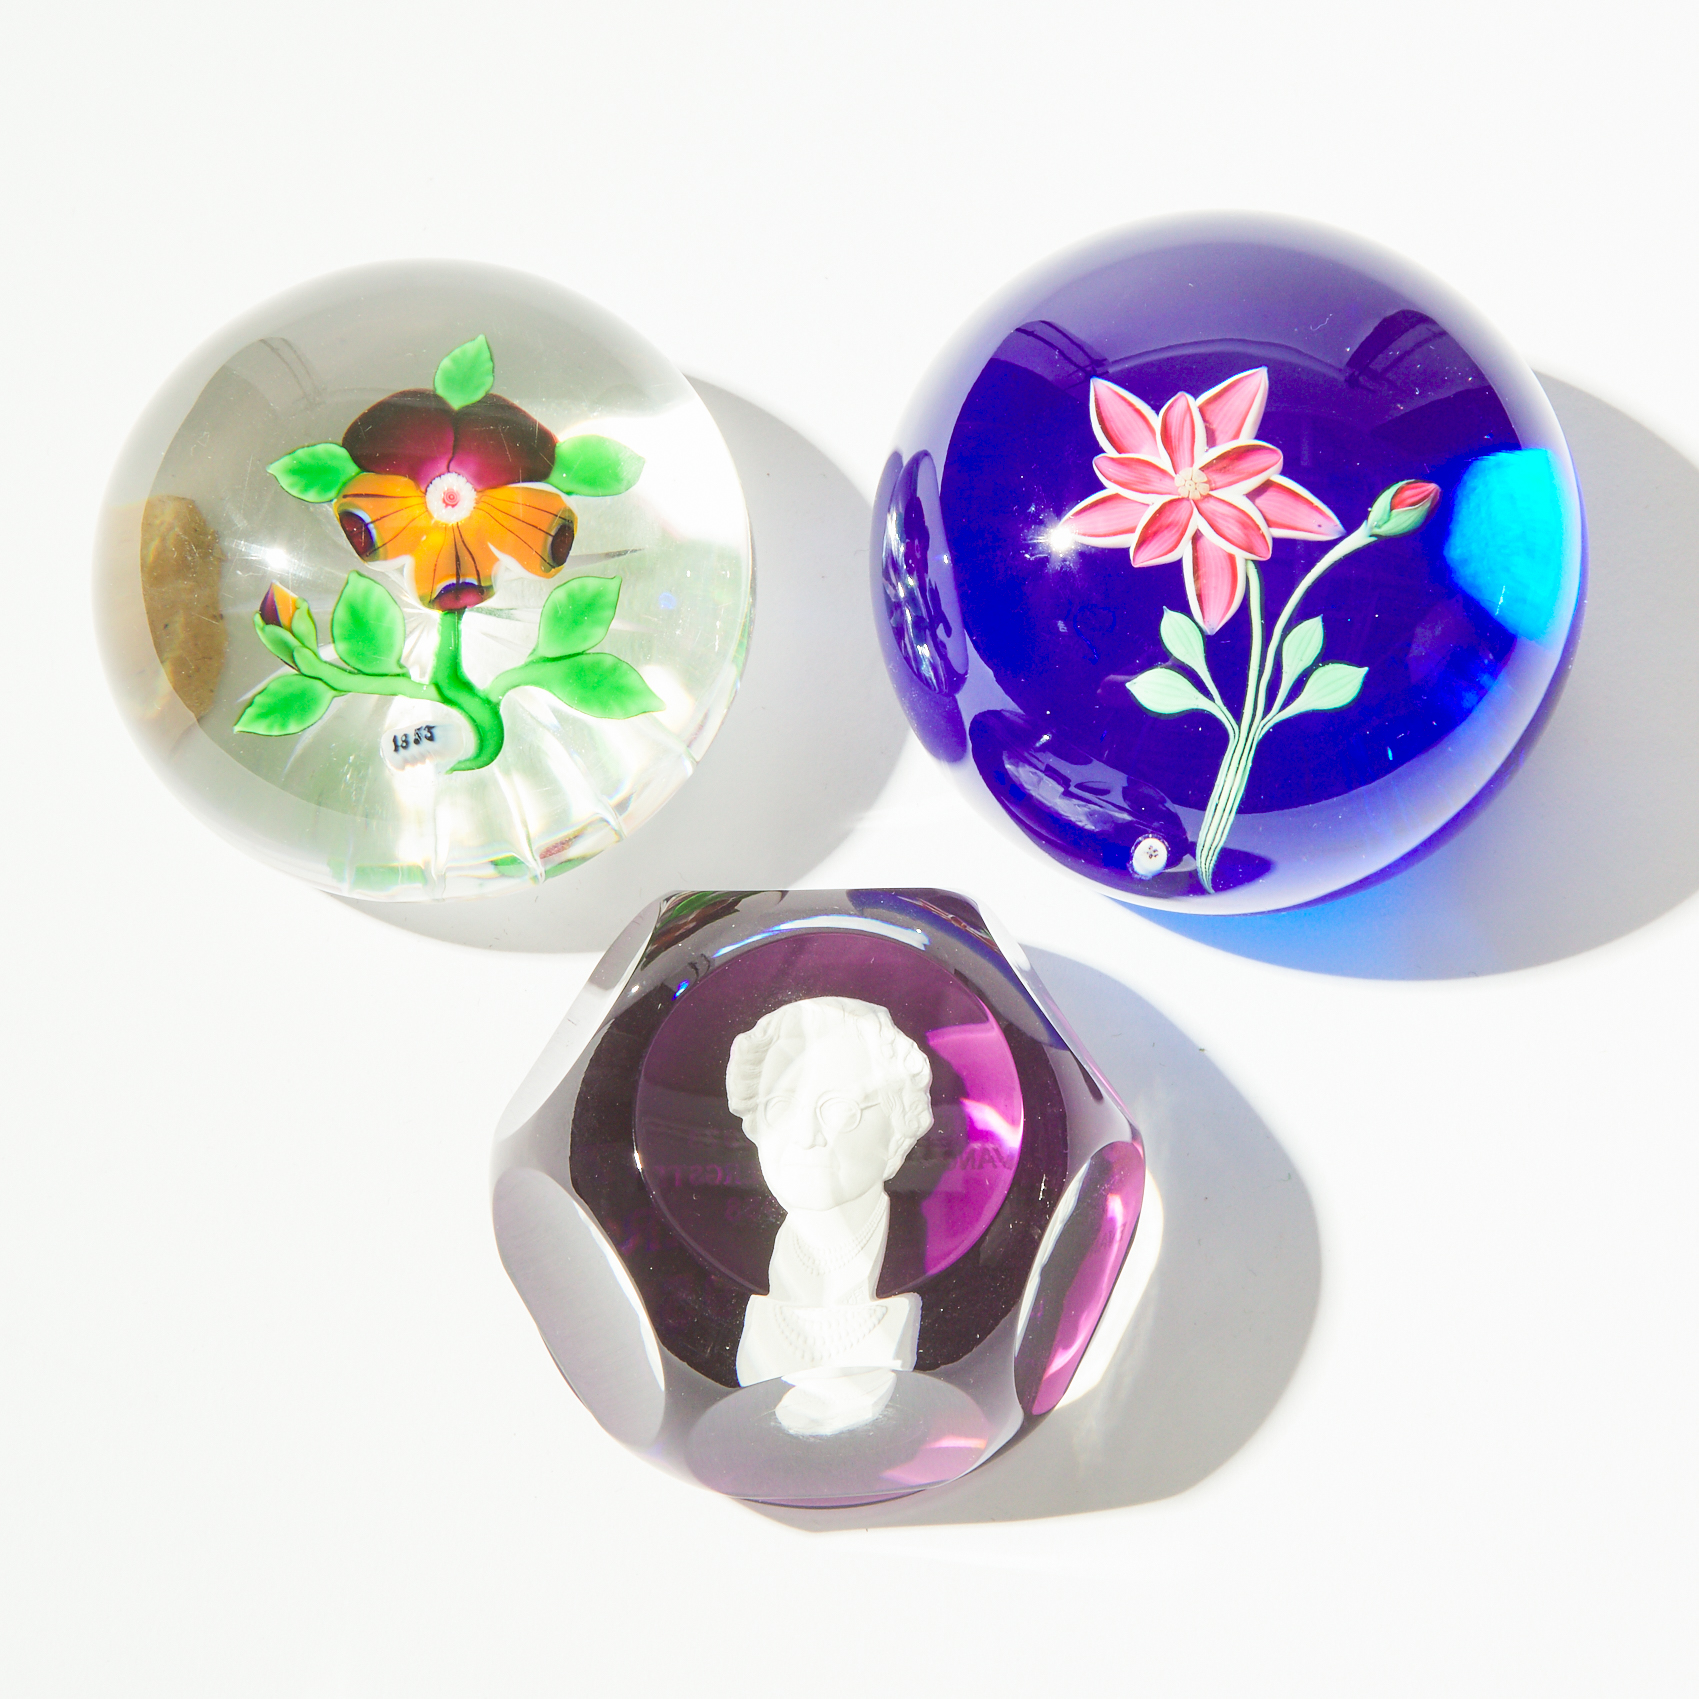 Baccarat Dupont Pansy, Clematis, and Sulphide Glass Paperweights, c.1930/1973